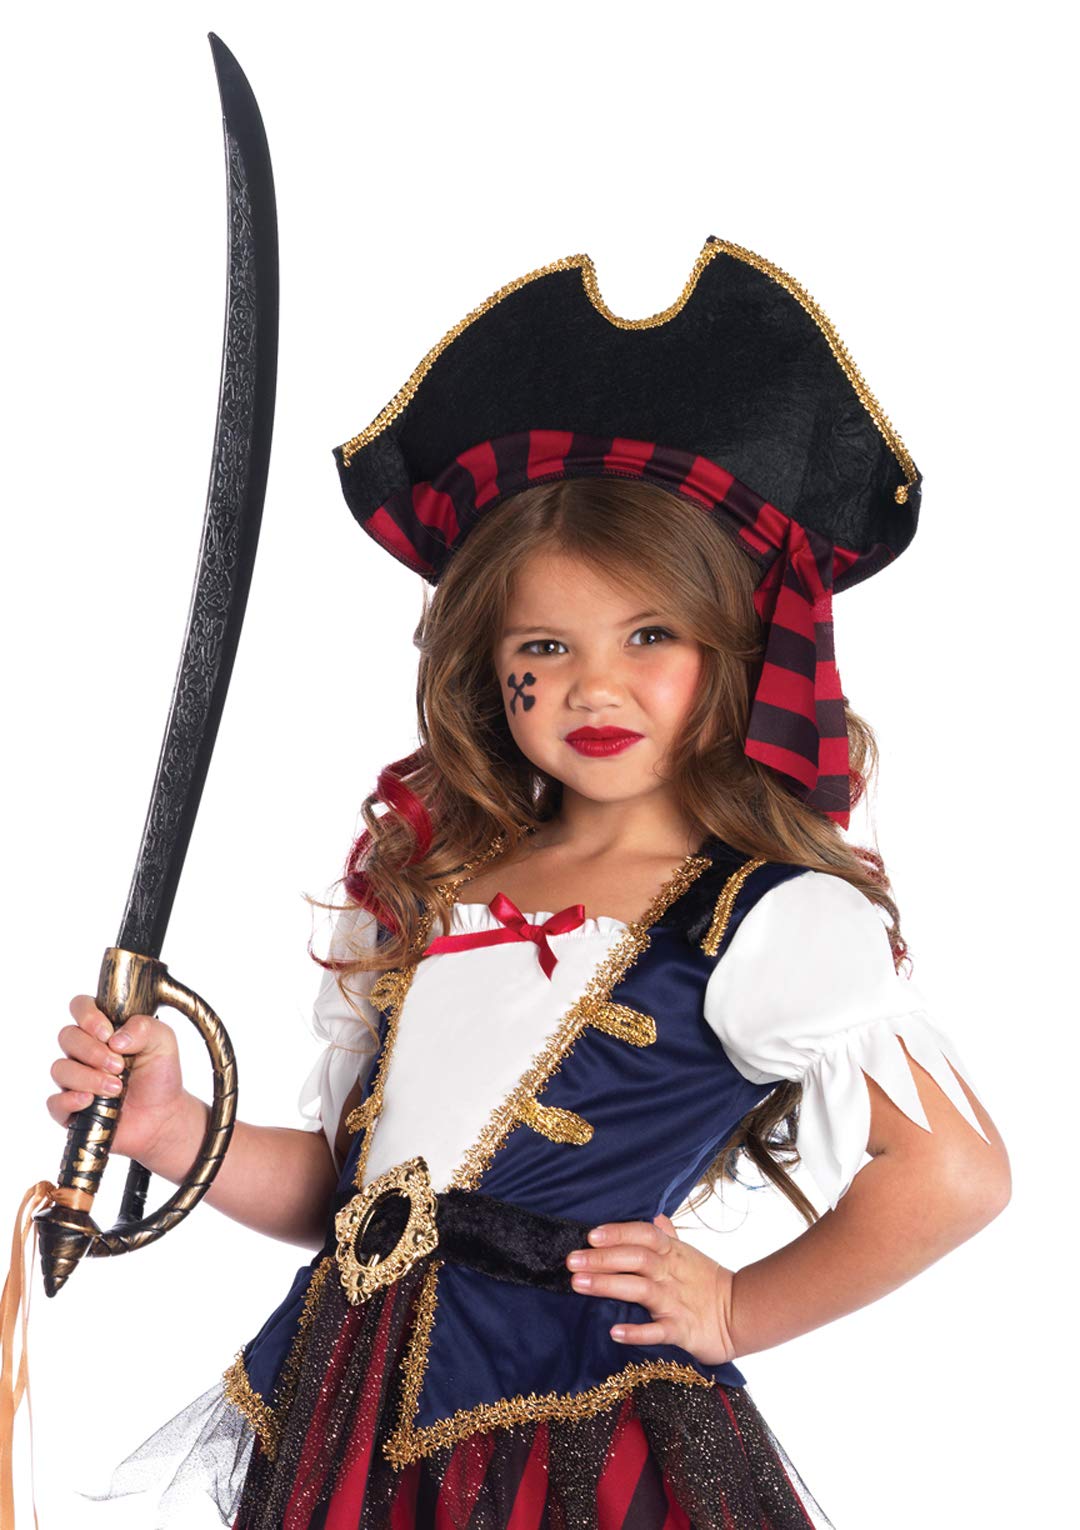 Leg Avenue Enchanted Costumes by Leg Avenue Girl's 2 Pc Caribbean Pirate Costume with Dress and Hat, Multicolor, X-Small (Age: 3-4)